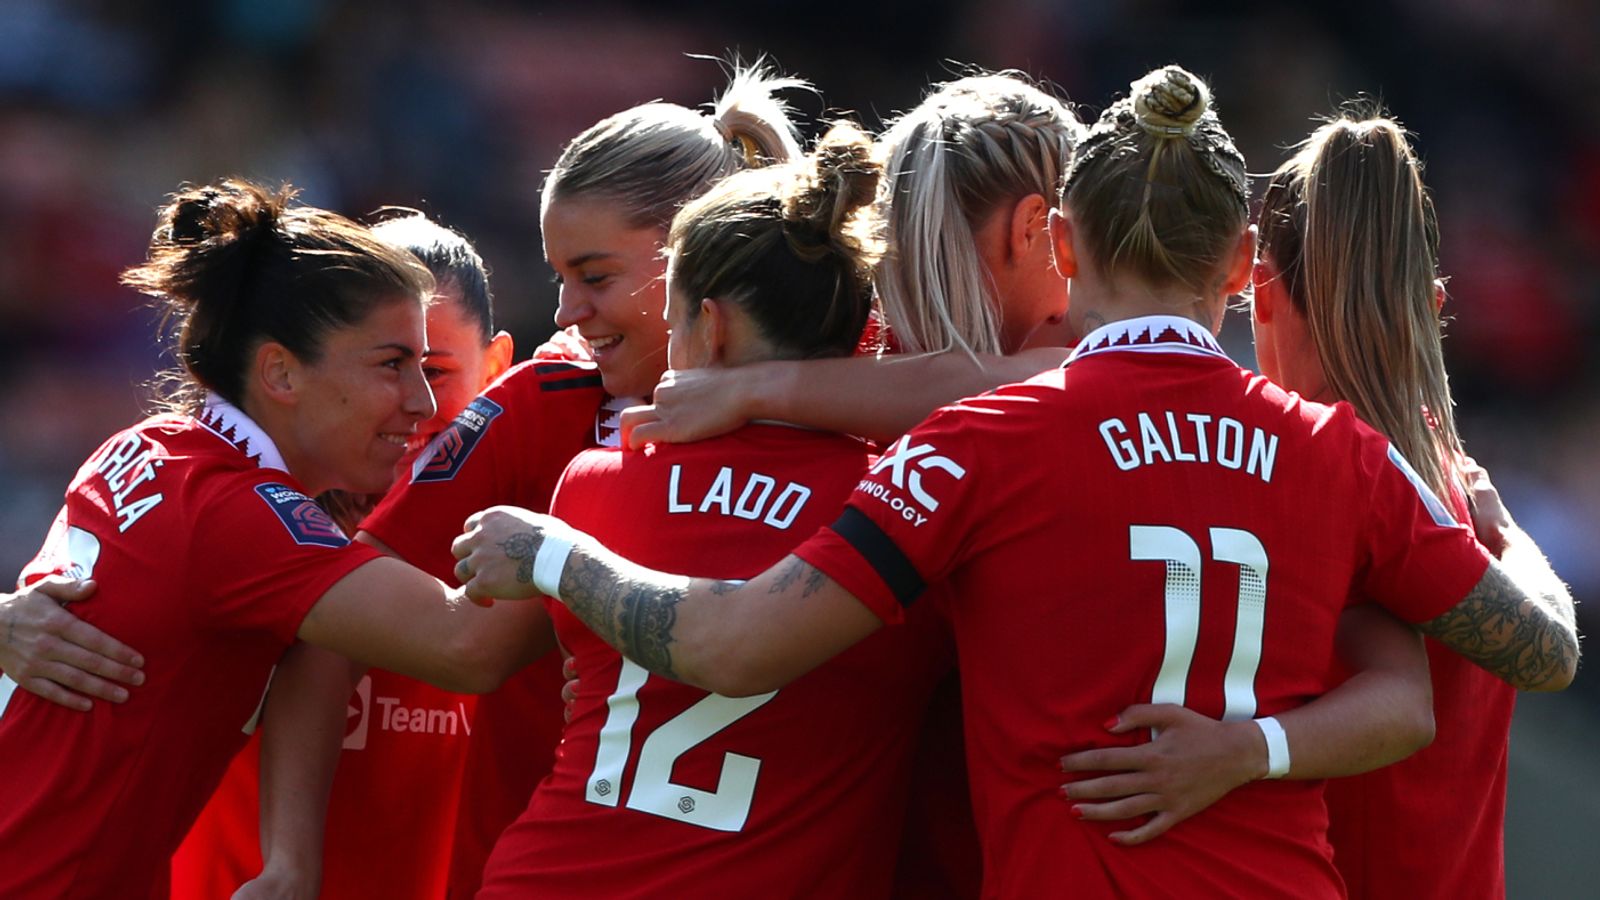 Polly Bancroft exclusive: Manchester United Women ahead of curve with new 'Head ..